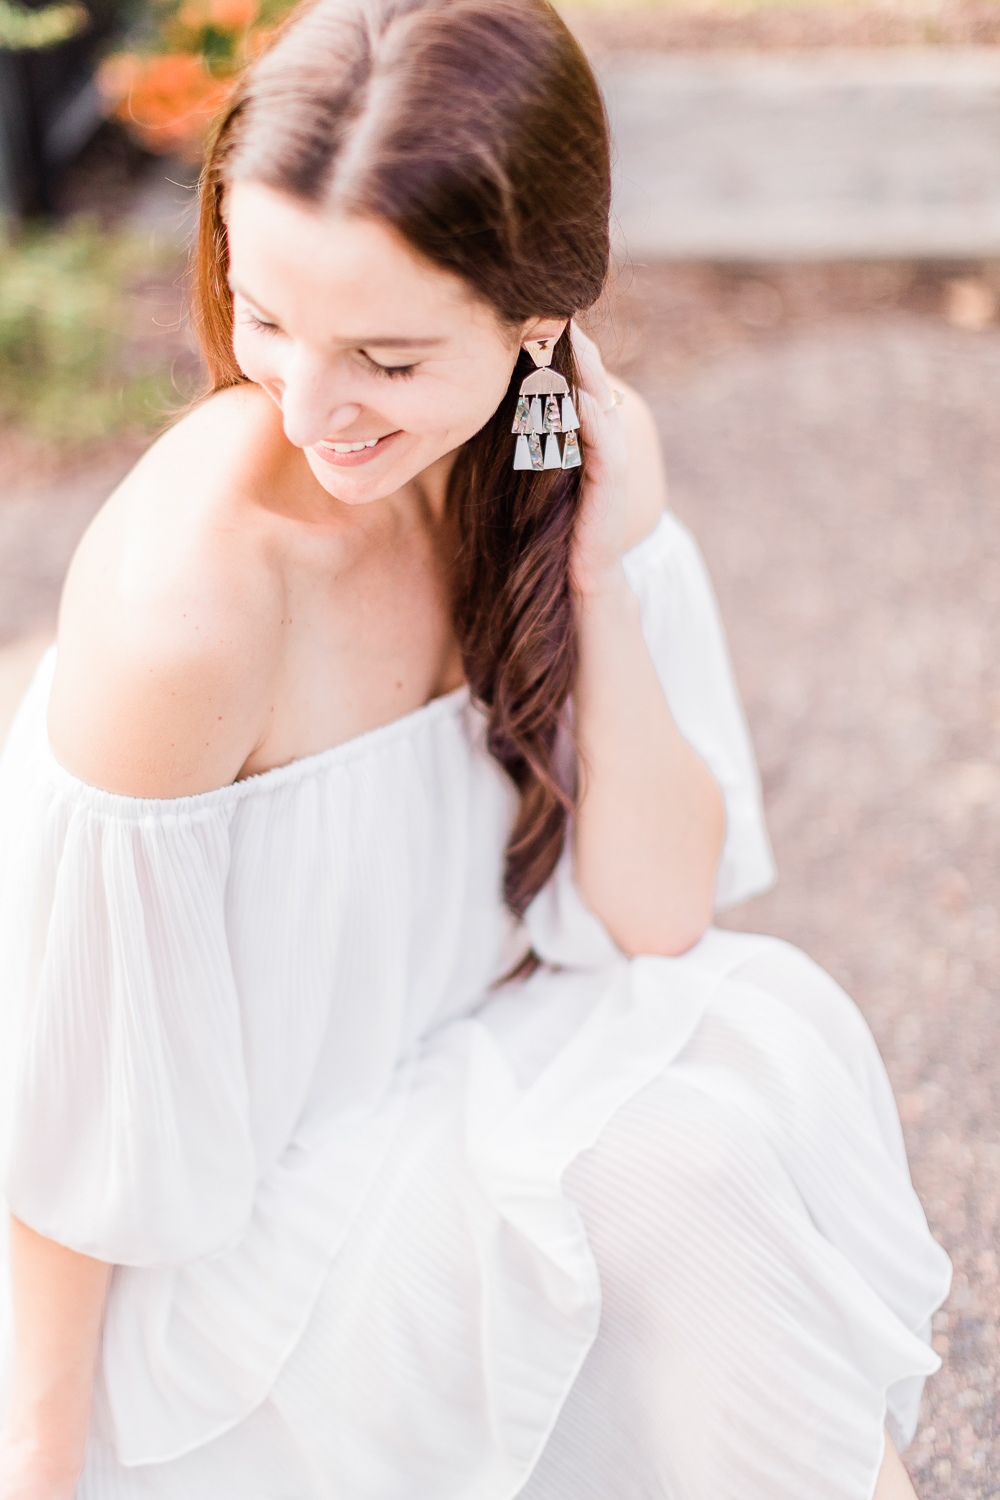 Kendra Scott Rechelle Silver Statement Earrings in Neutral Mix styled by popular affordable fashion blogger Stephanie Ziajka on Diary of a Debutante